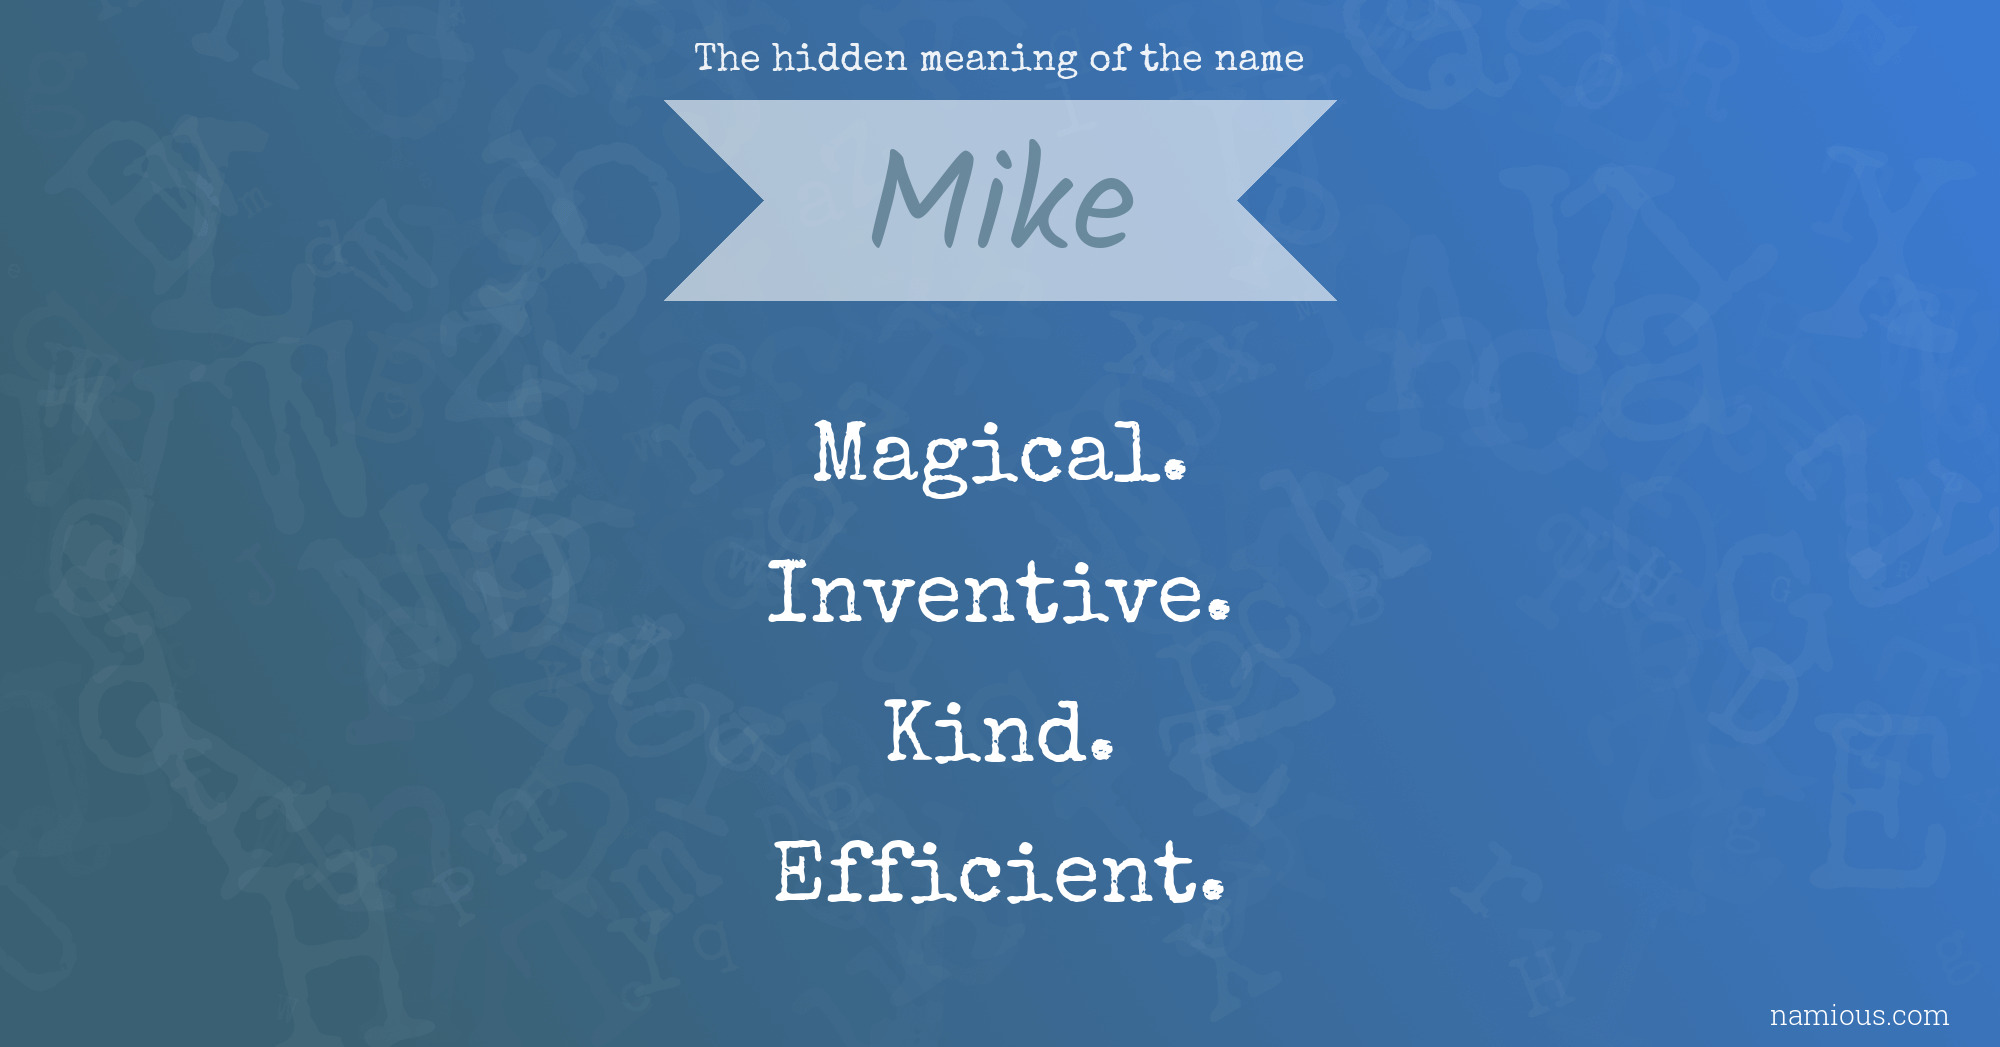 The hidden meaning of the name Mike